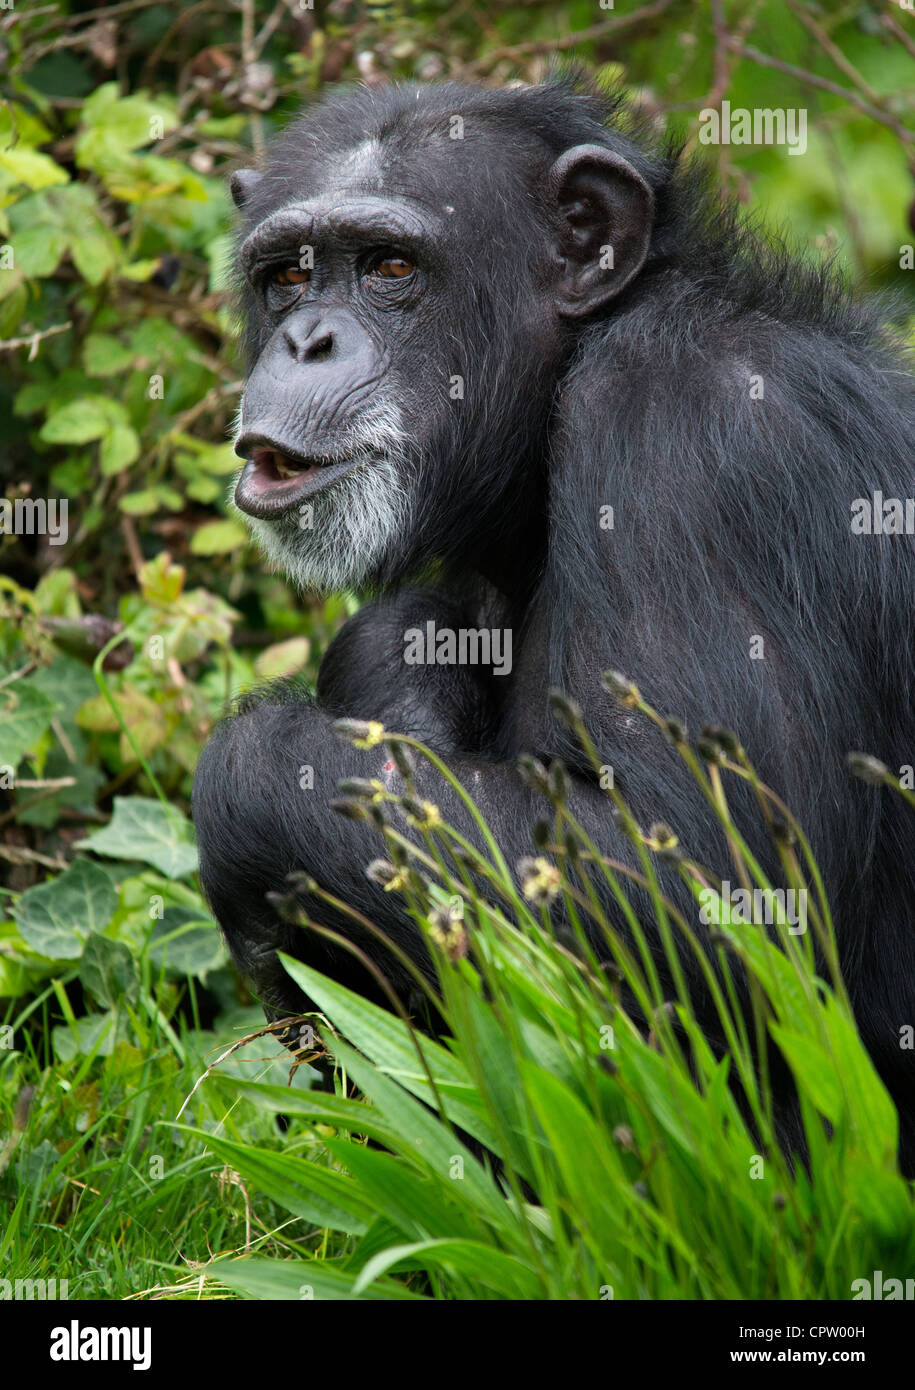 Male chimpanzee in long grass against a background of leaves Stock Photo